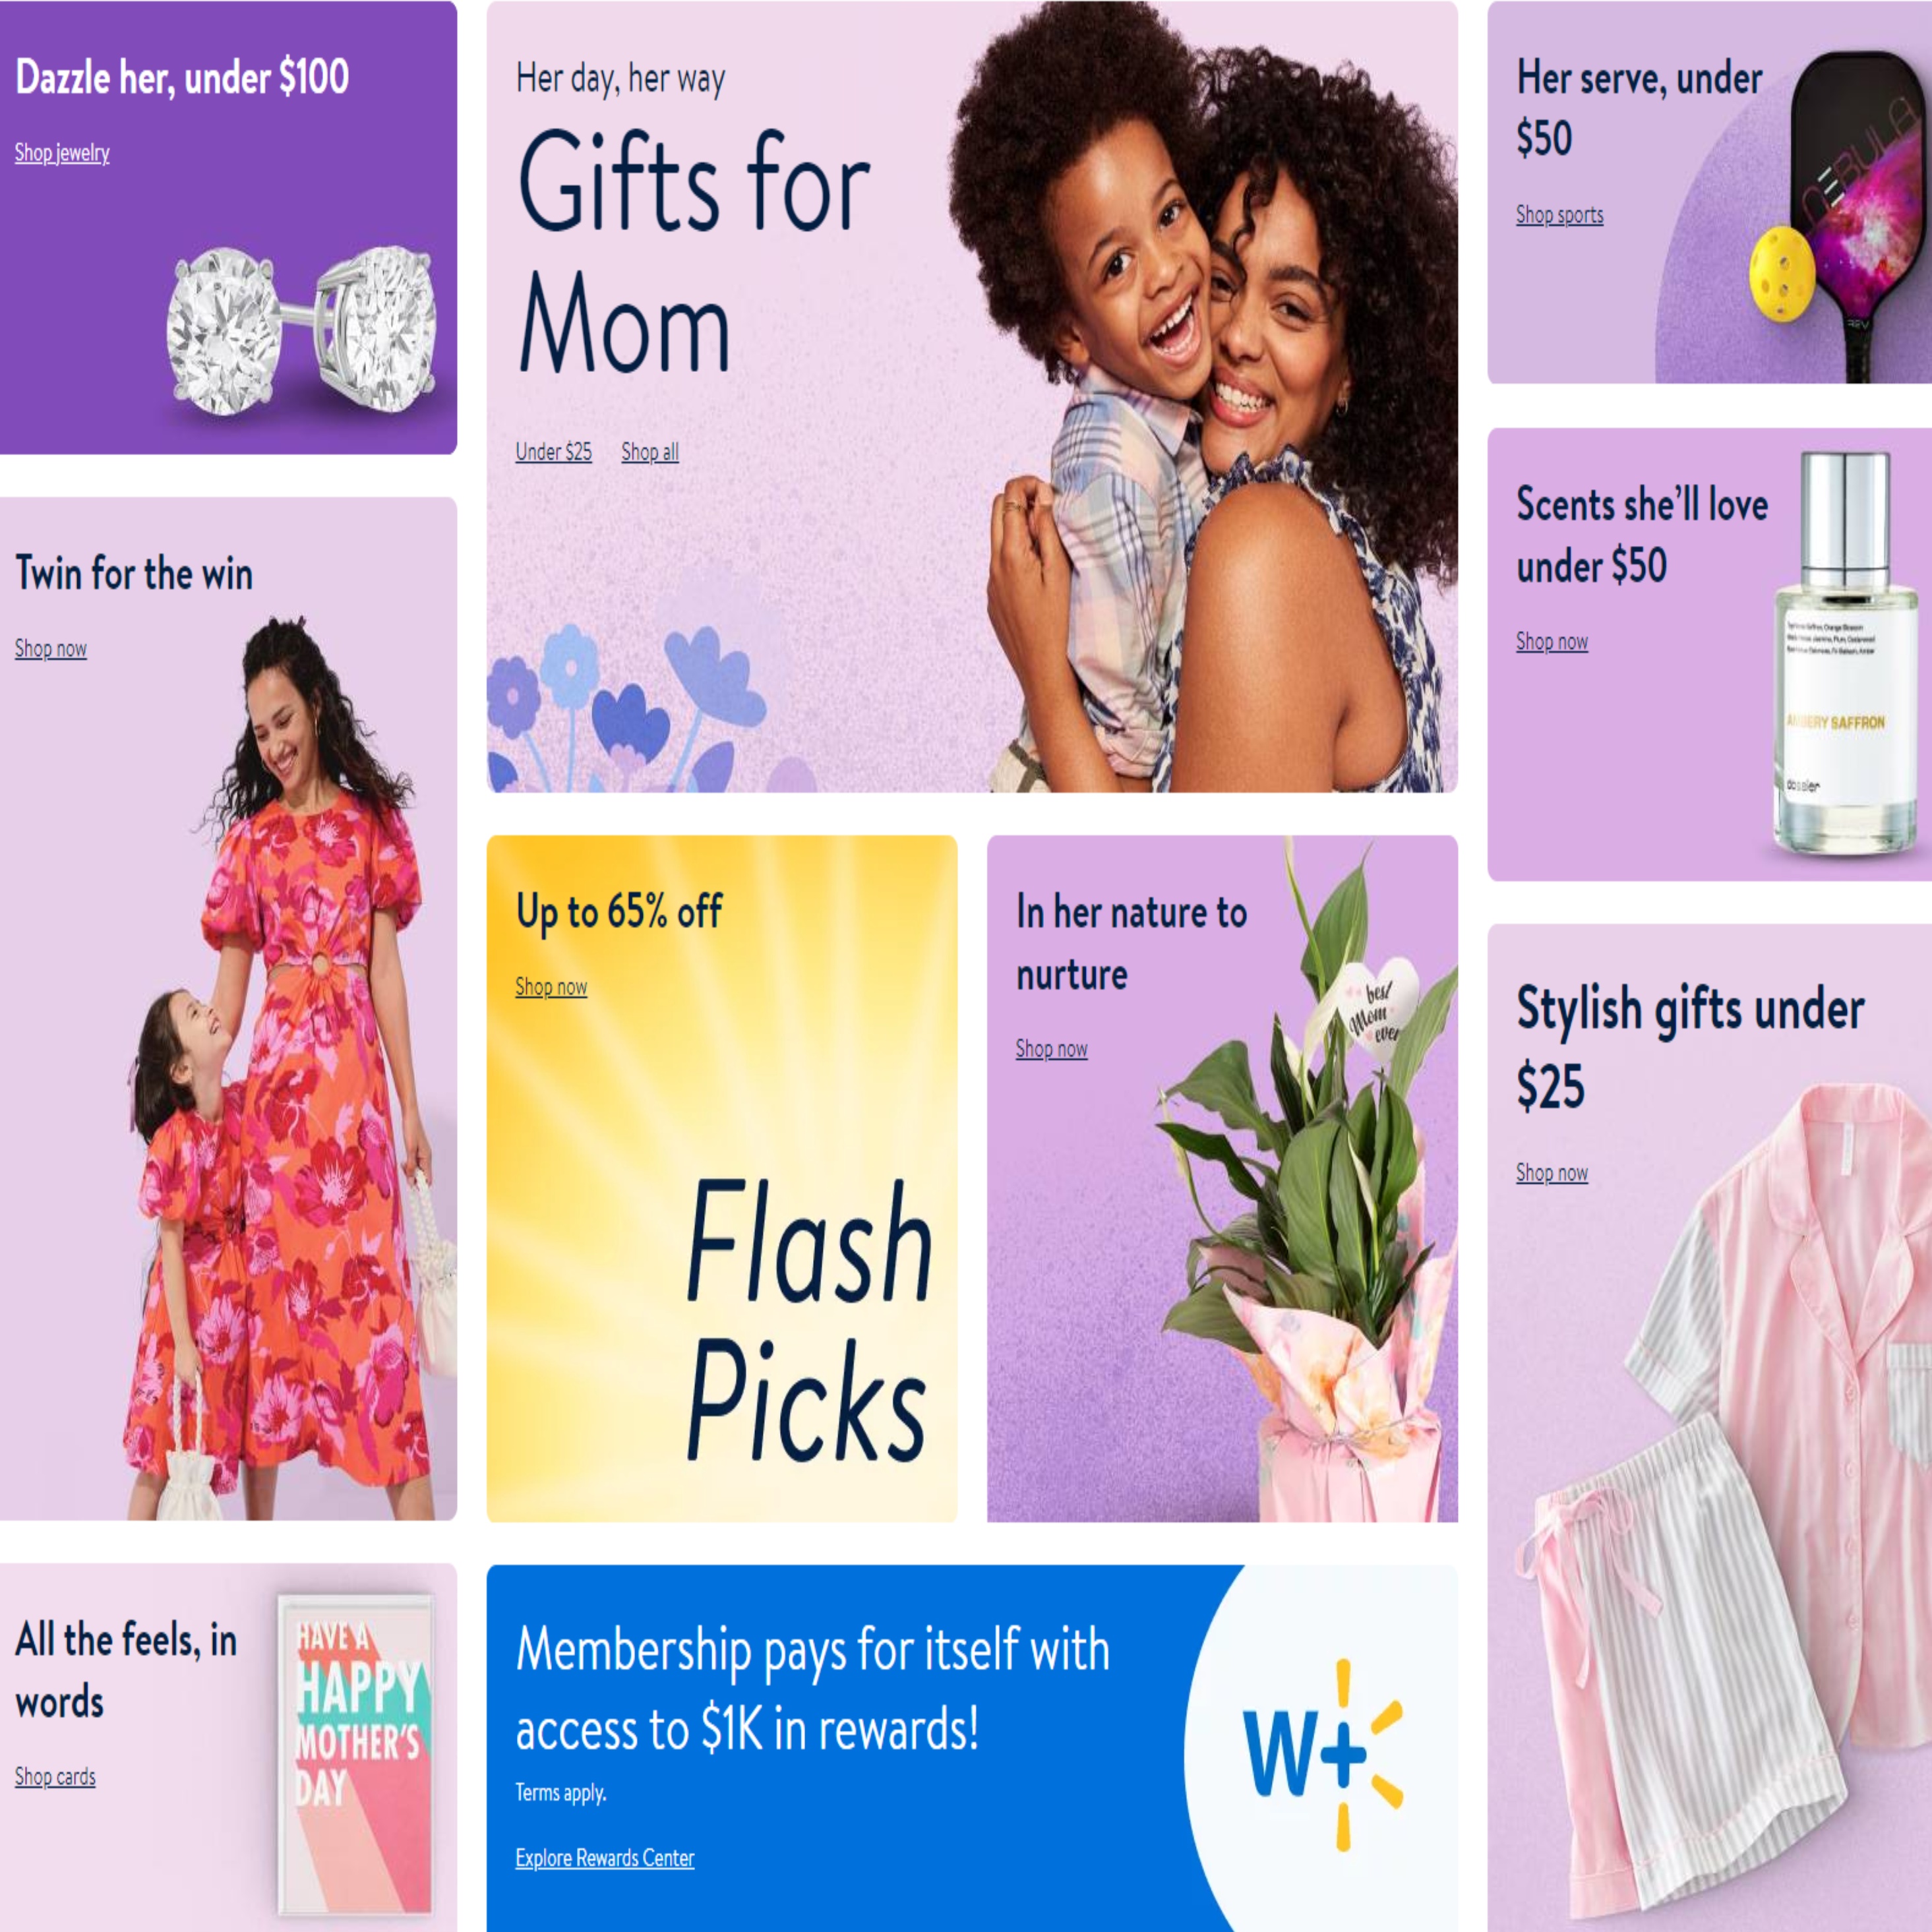 Walmart launches ‘Mother of All Savings Memberships” campaign before Mother’s Day